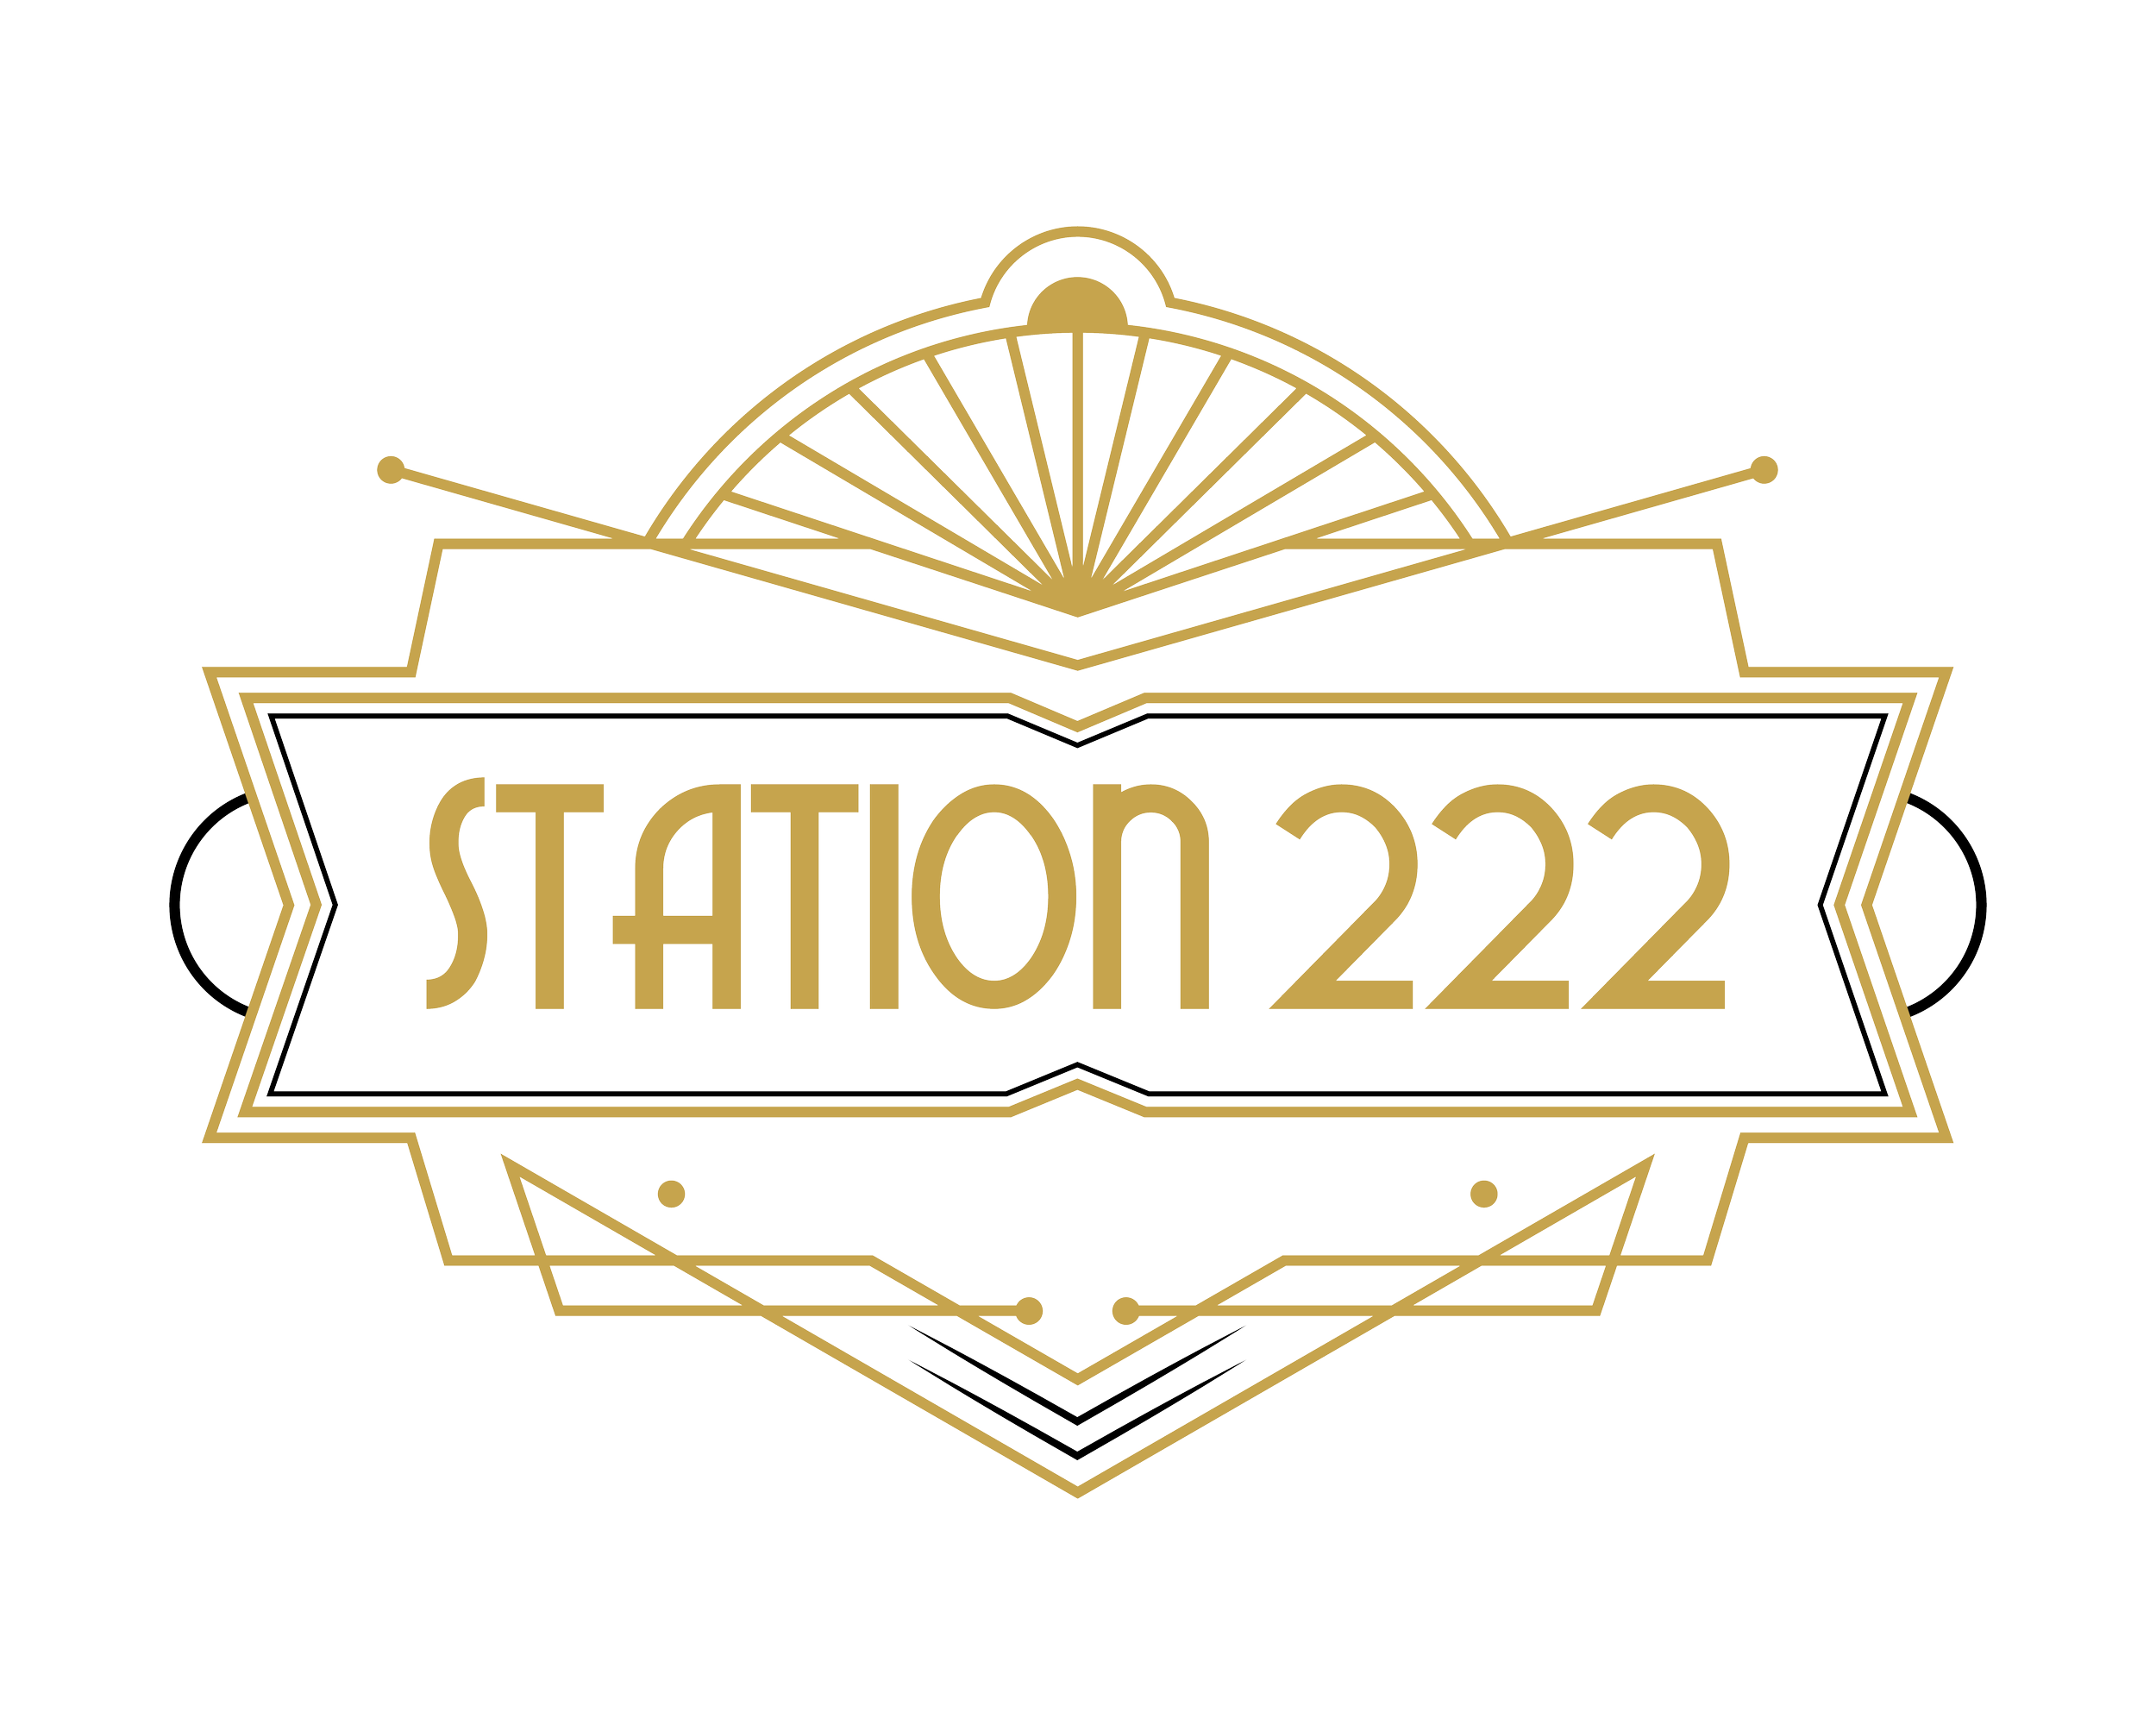 Station 222.png